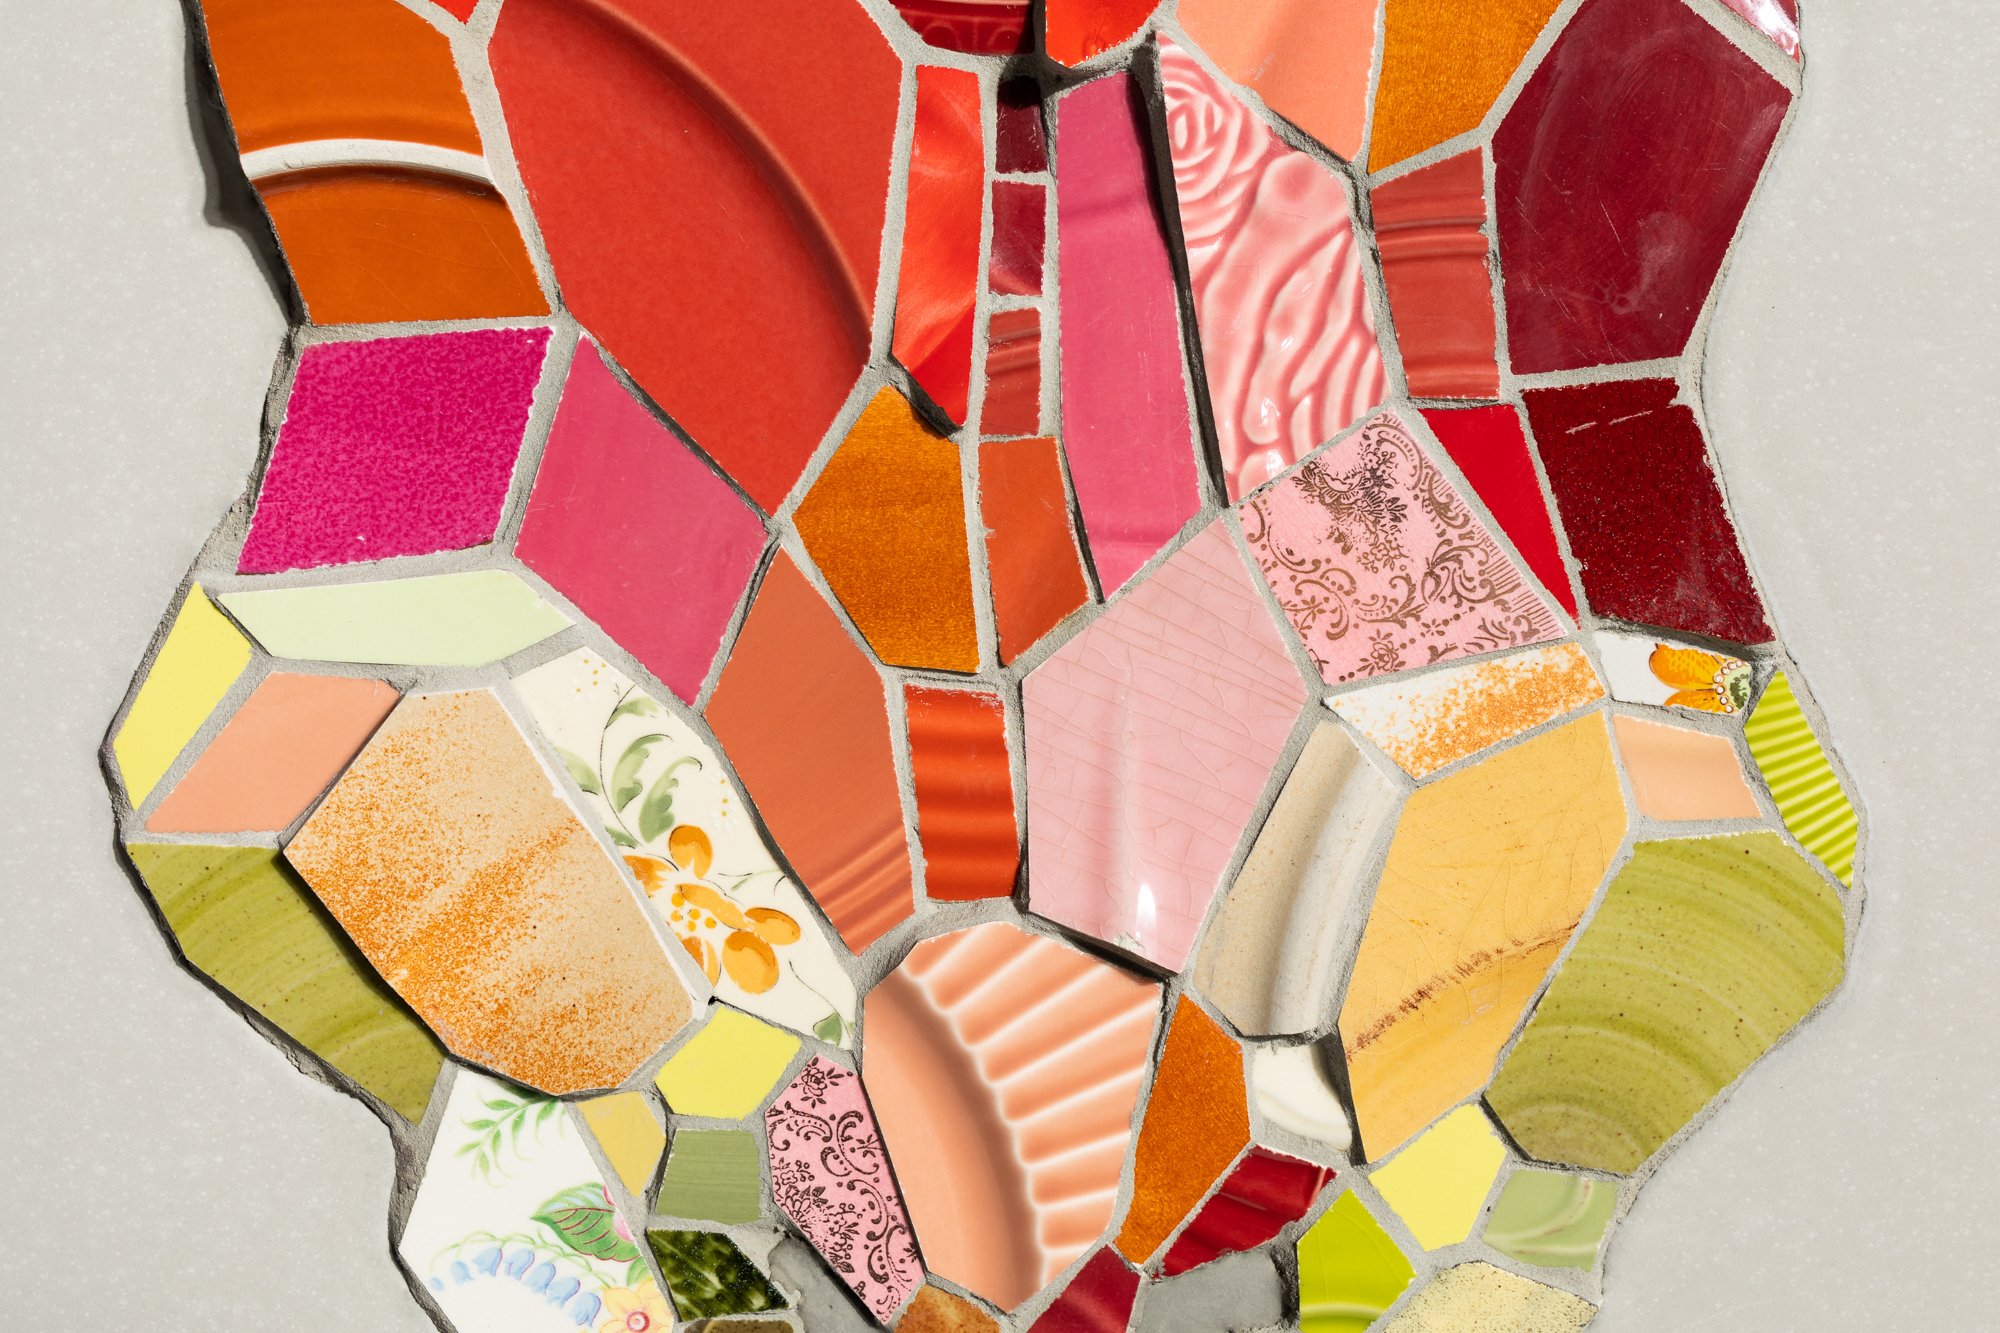 "A Fruitbowl" Anatomical Mixed Media Mosaic by Mary Lacy @ Soapbox Arts Gallery, Burlington, Vermont 